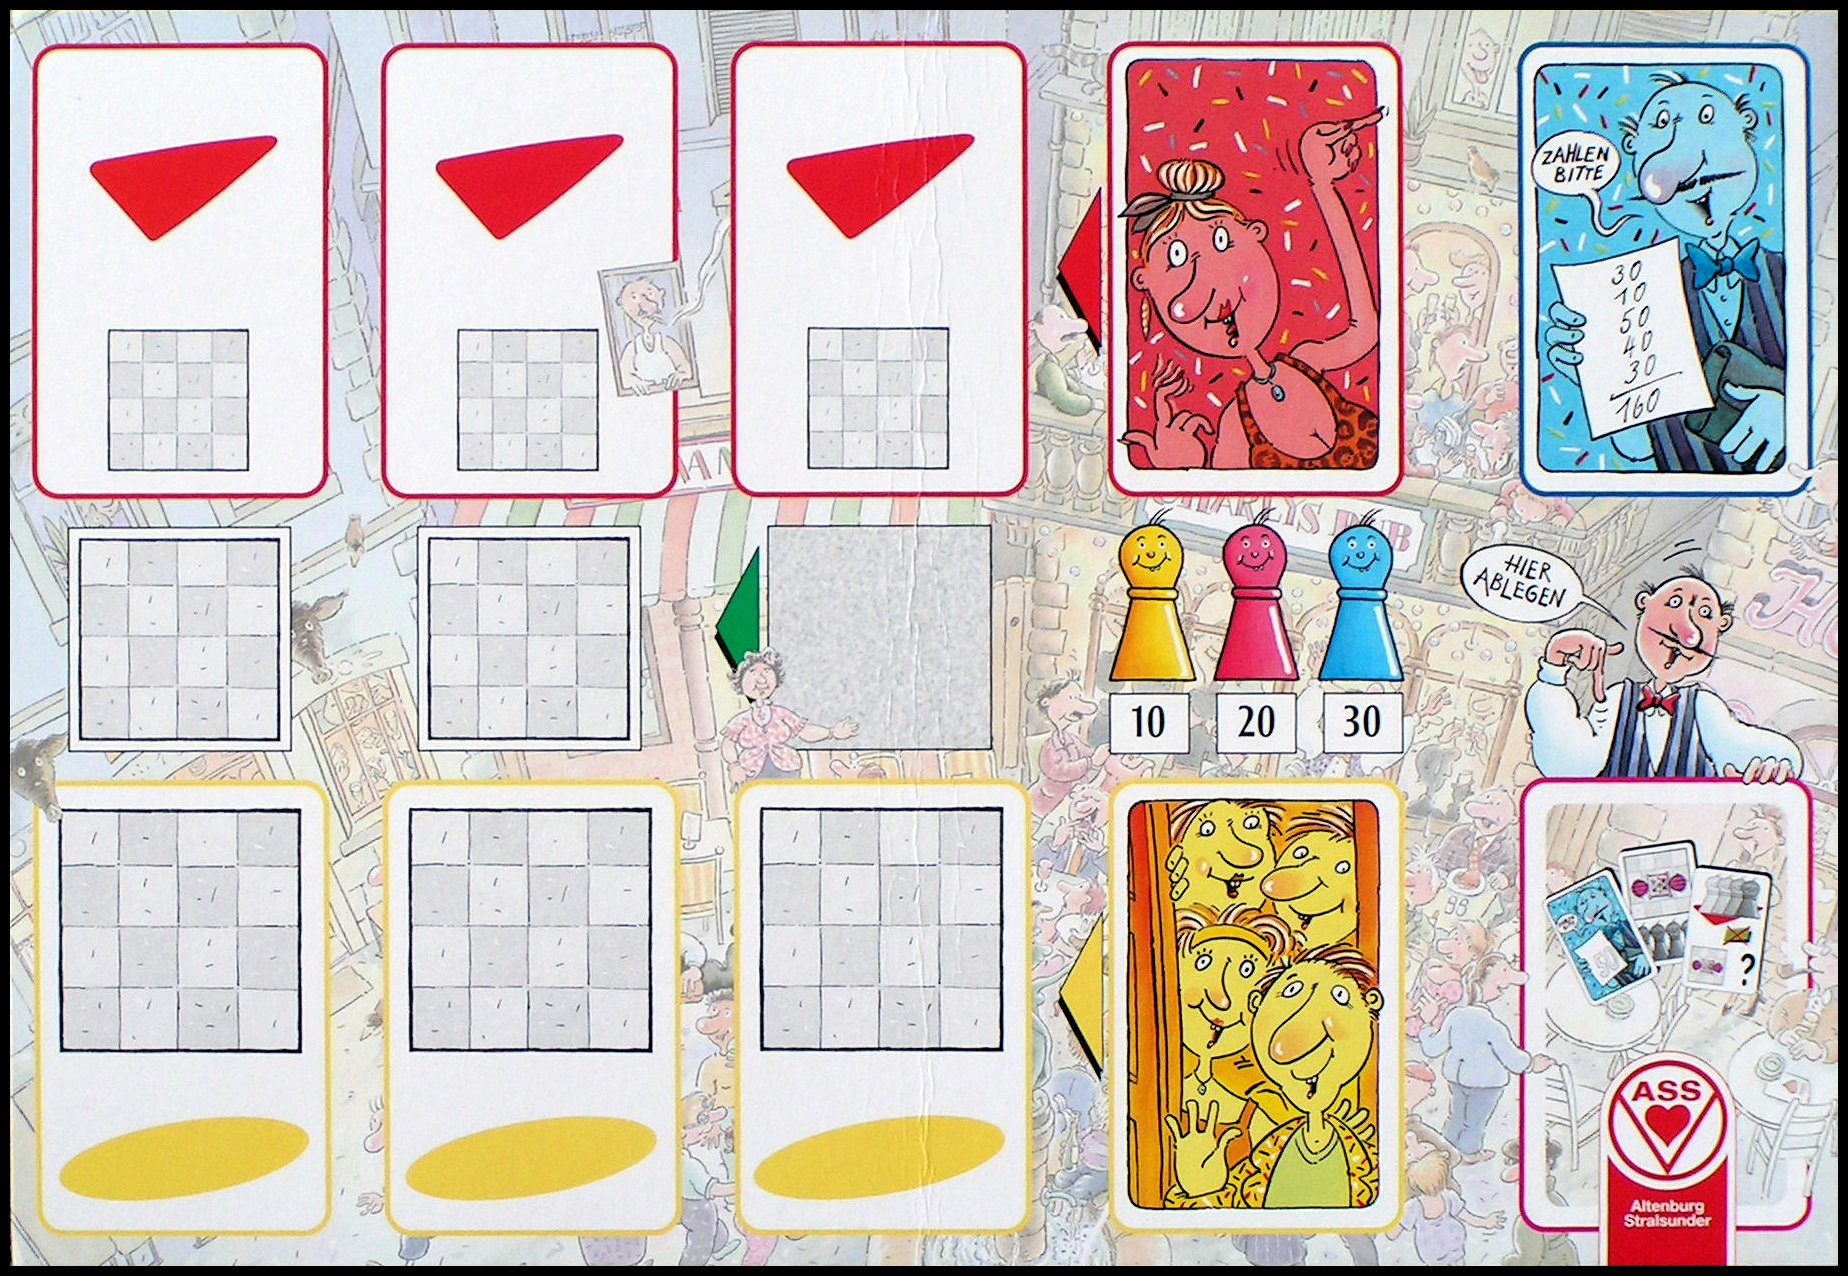 Volle Huette - The Central Game Board